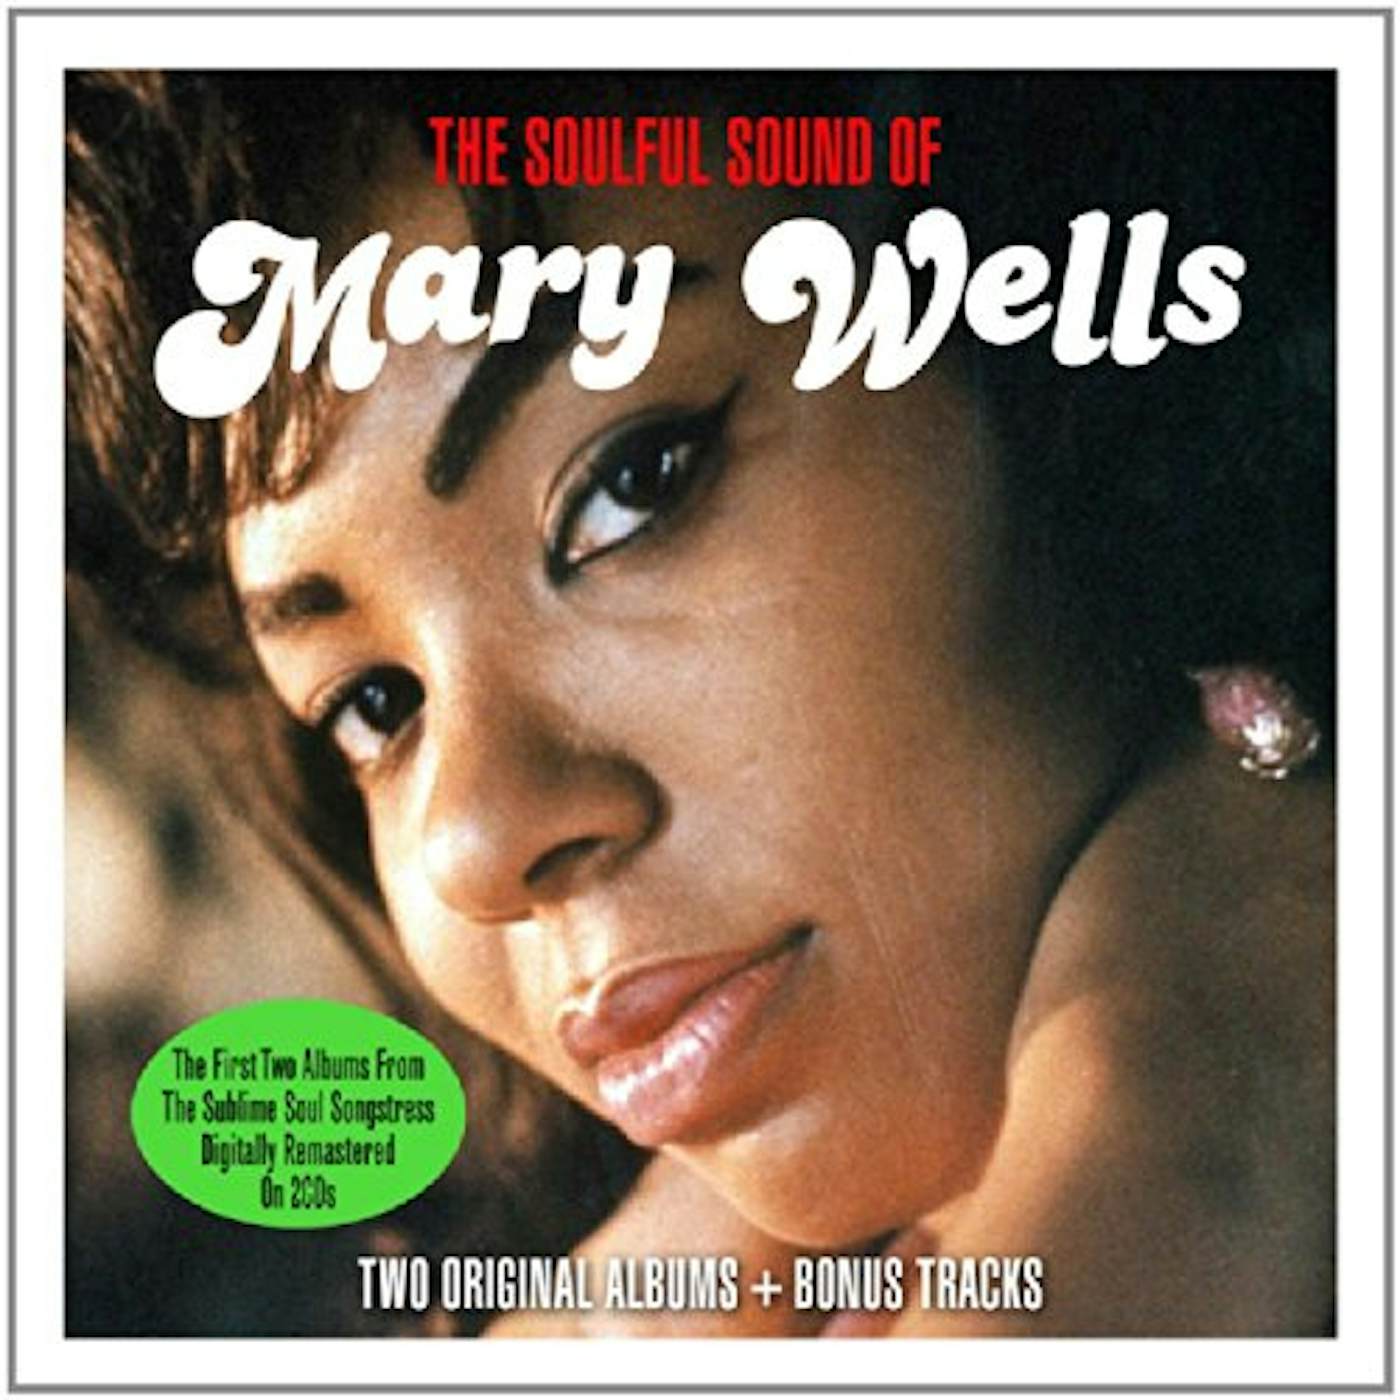 Mary Wells SOULFUL SOUND CD